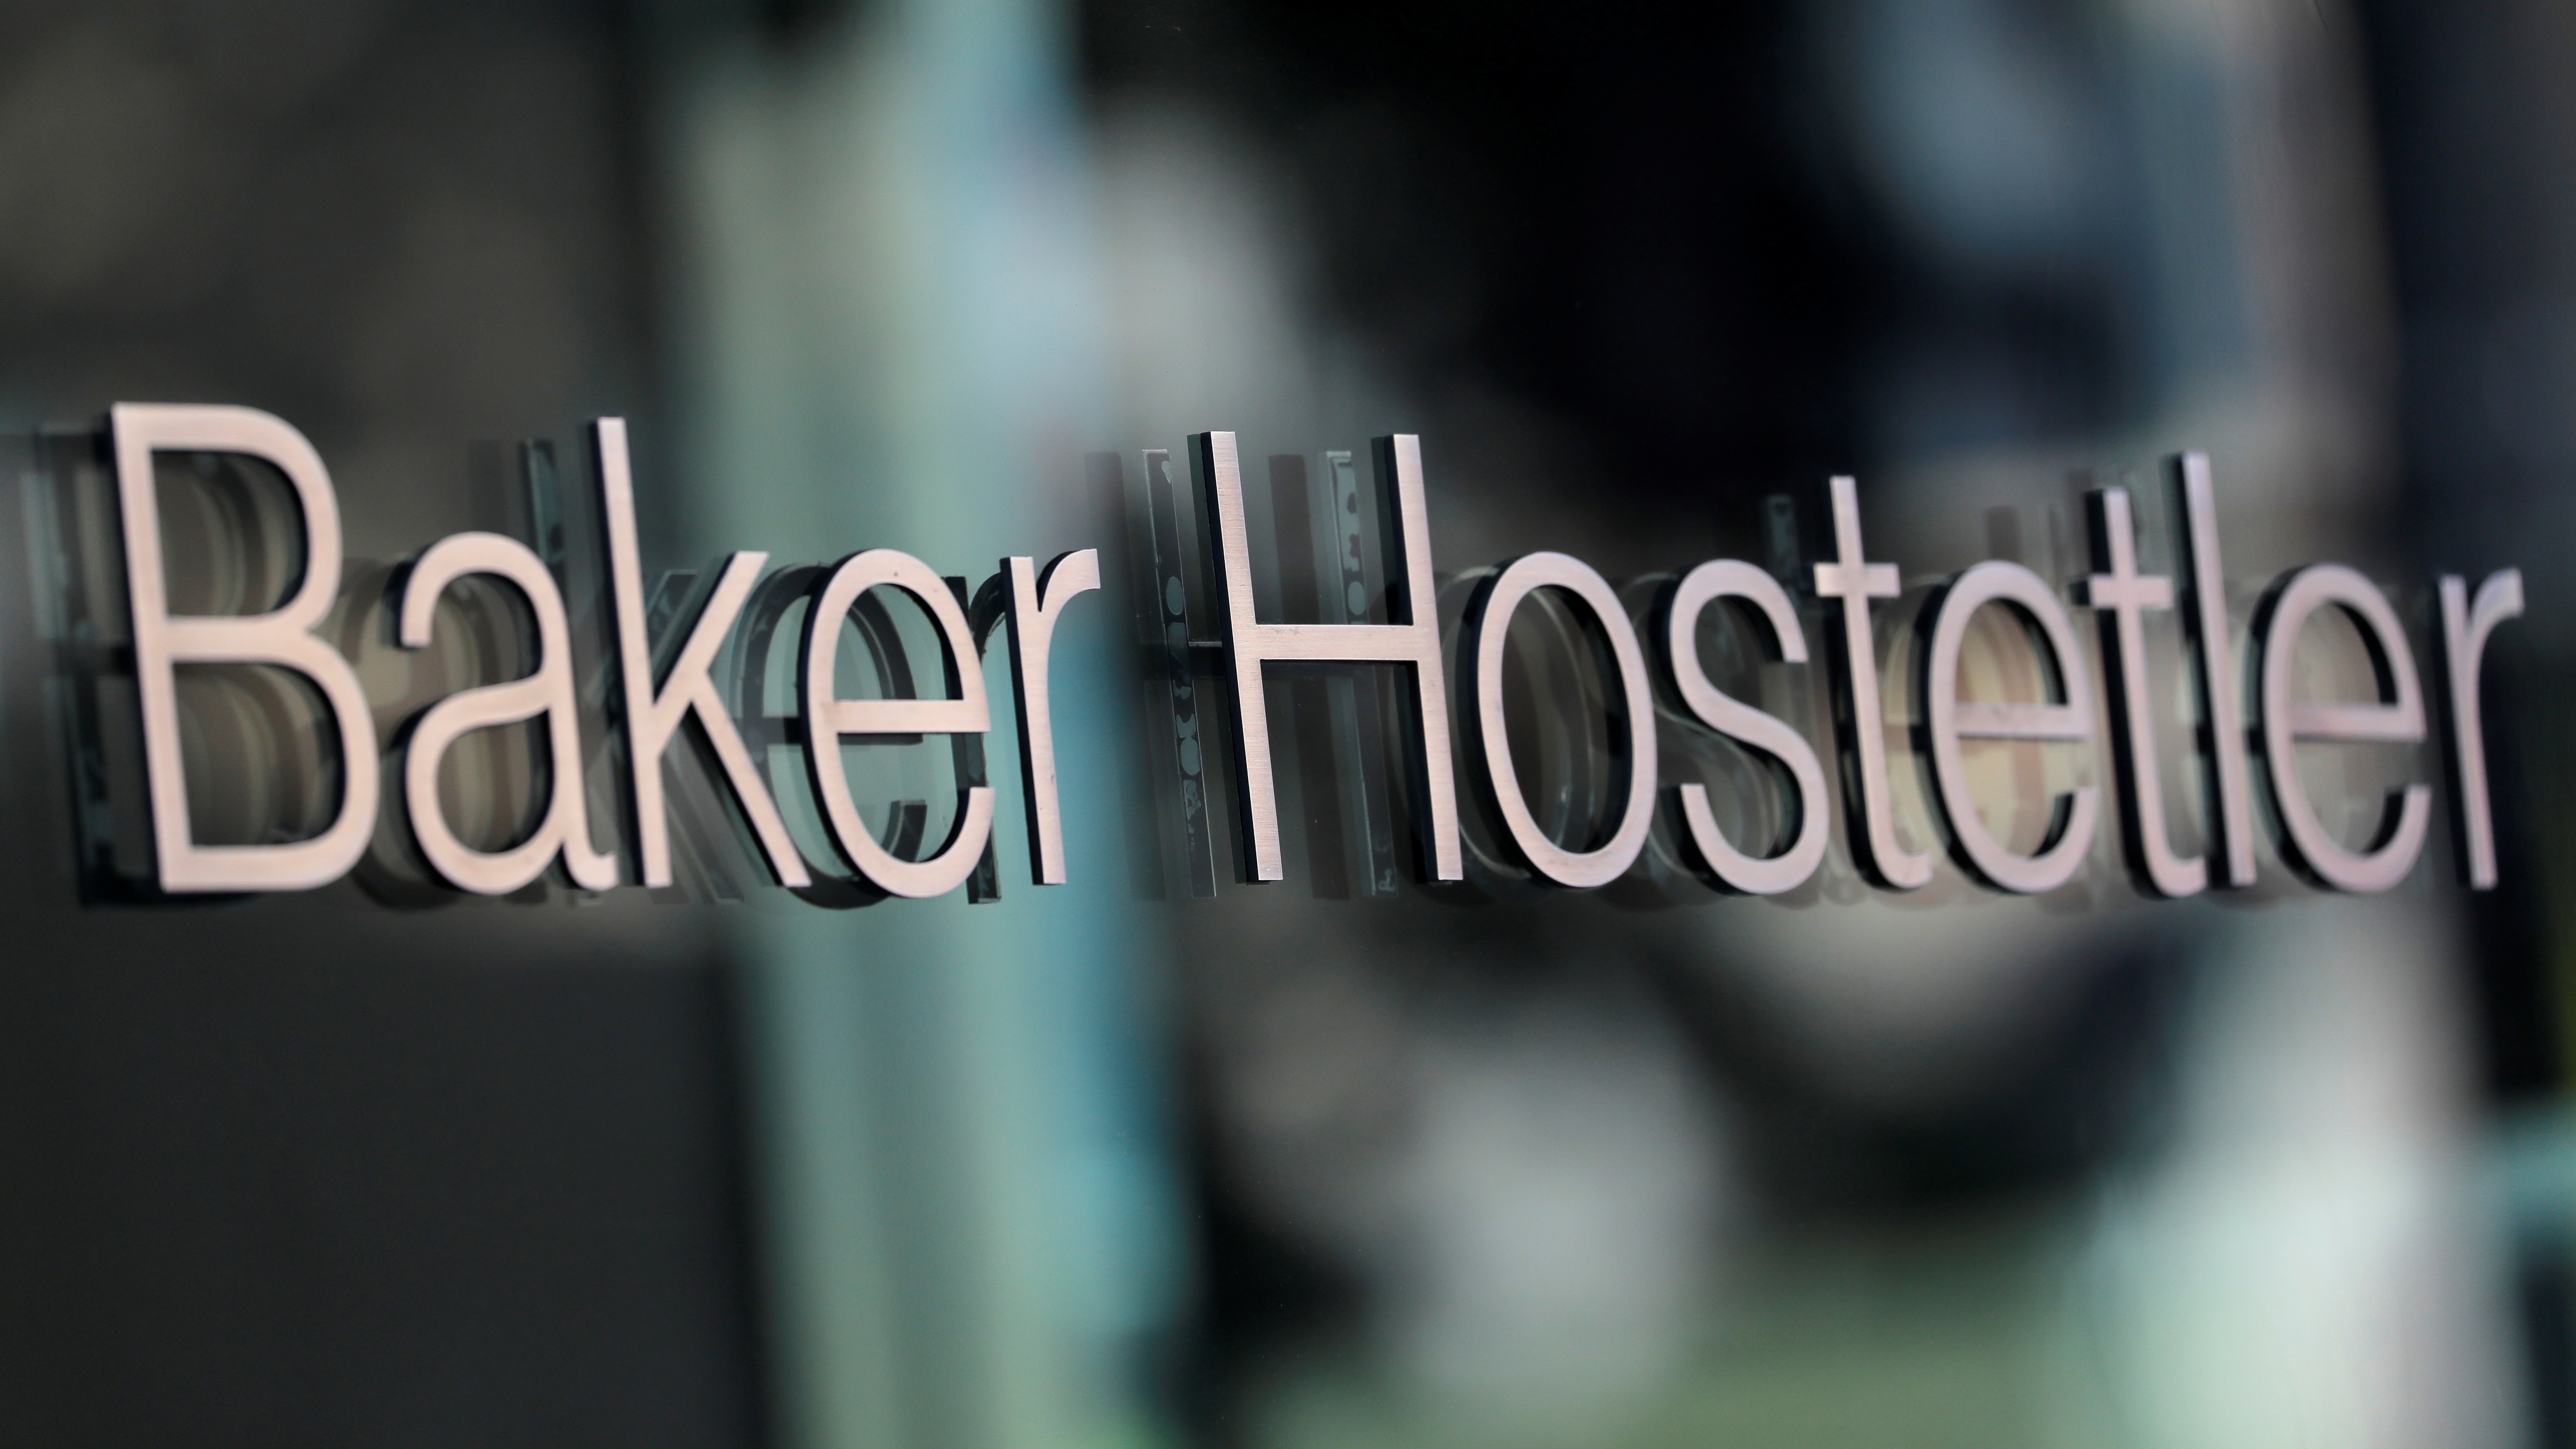 Signage is seen outside of the legal offices of the BakerHostetler law firm in Washington, D.C.